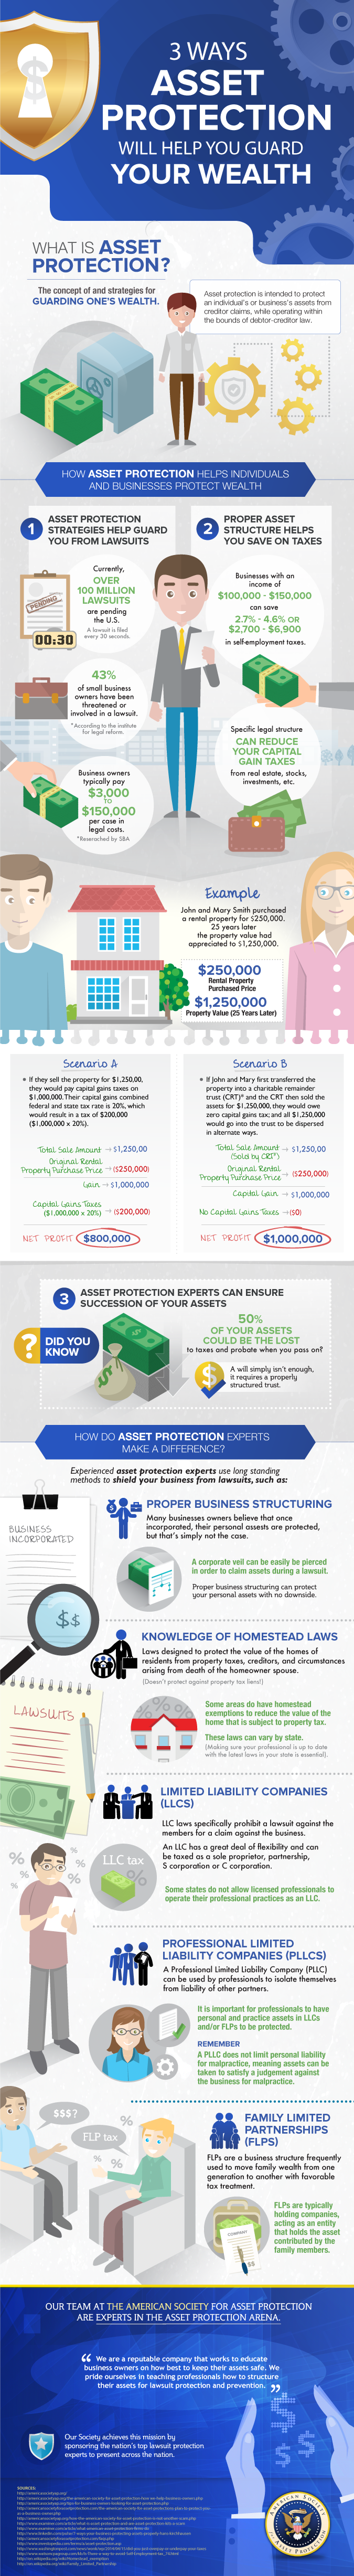 Protect your Assets info graphics